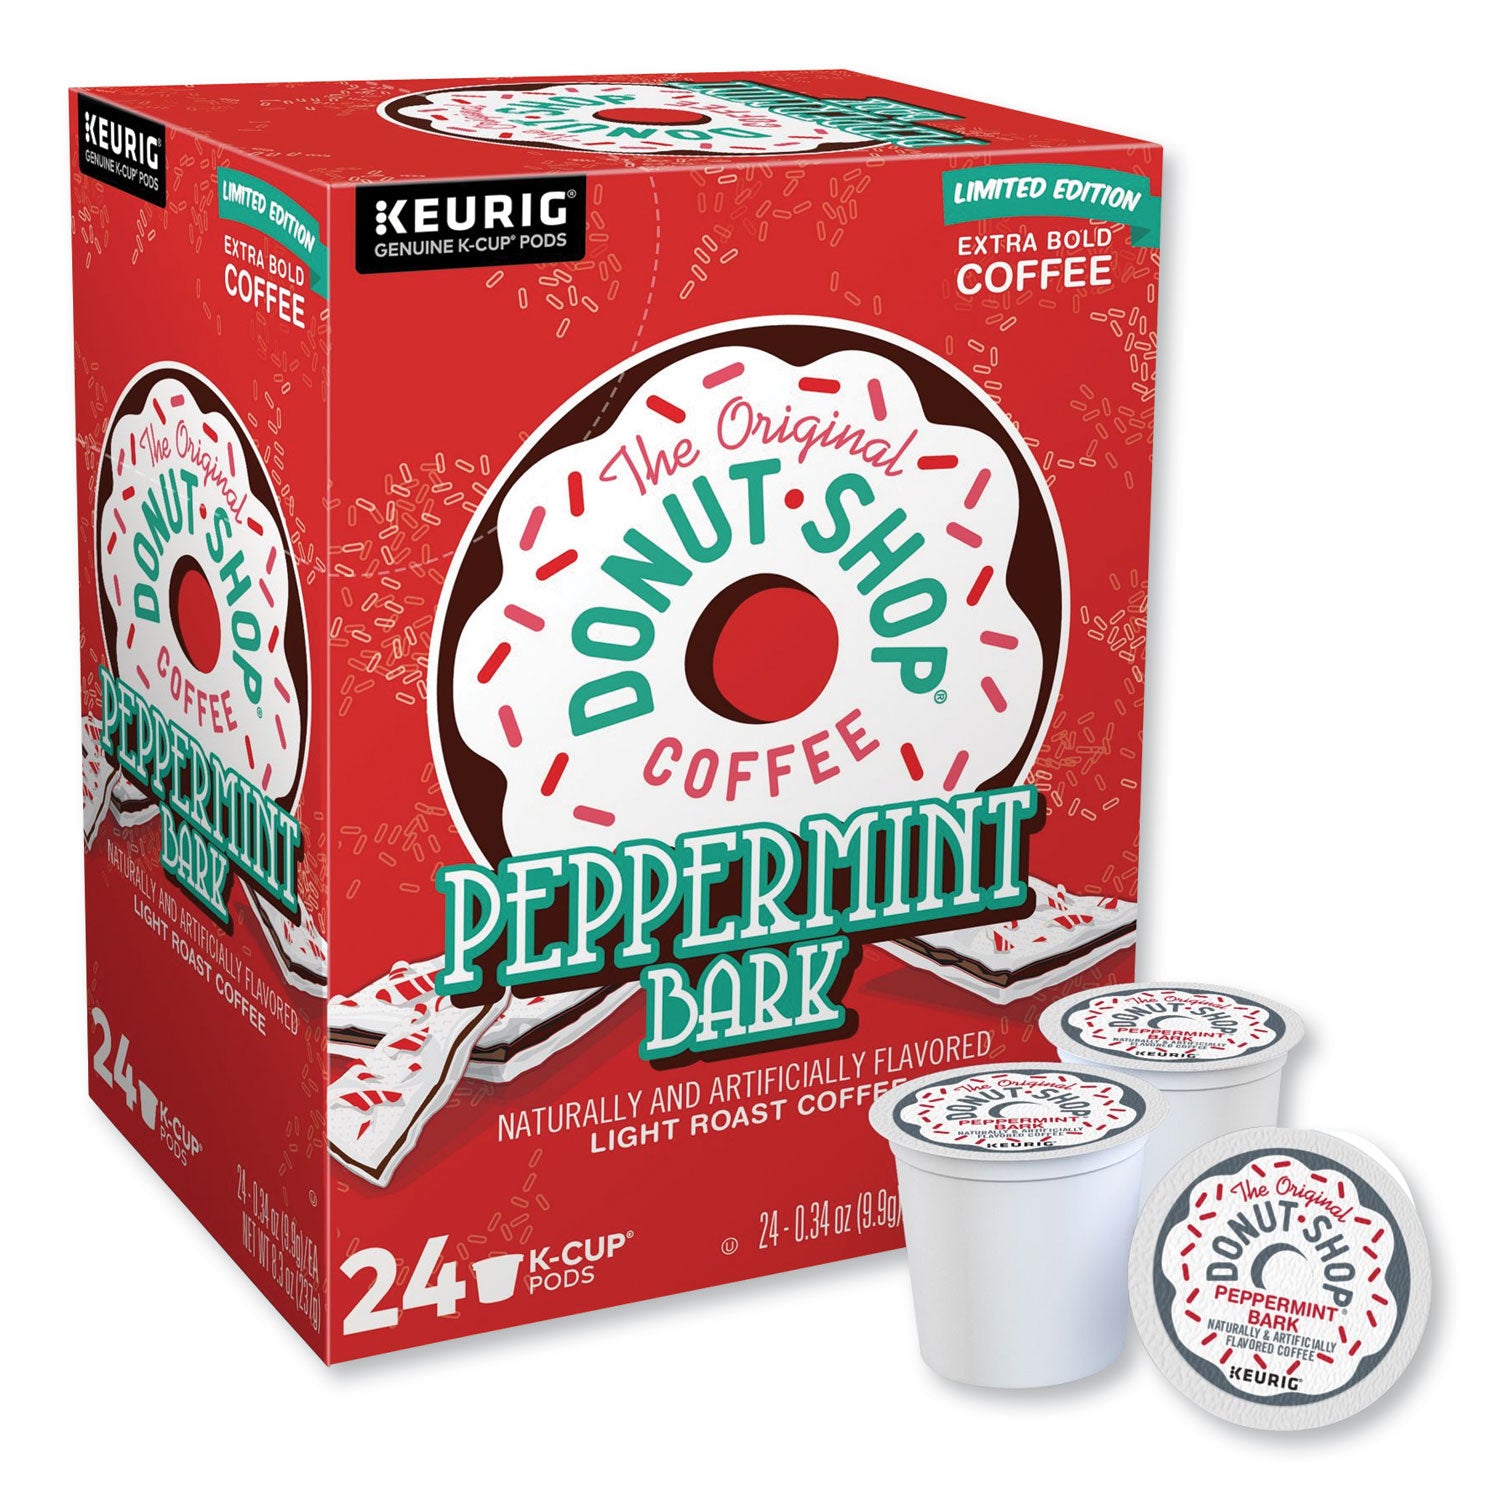 peppermint-bark-k-cup-pods-24-box_gmt7428 - 2